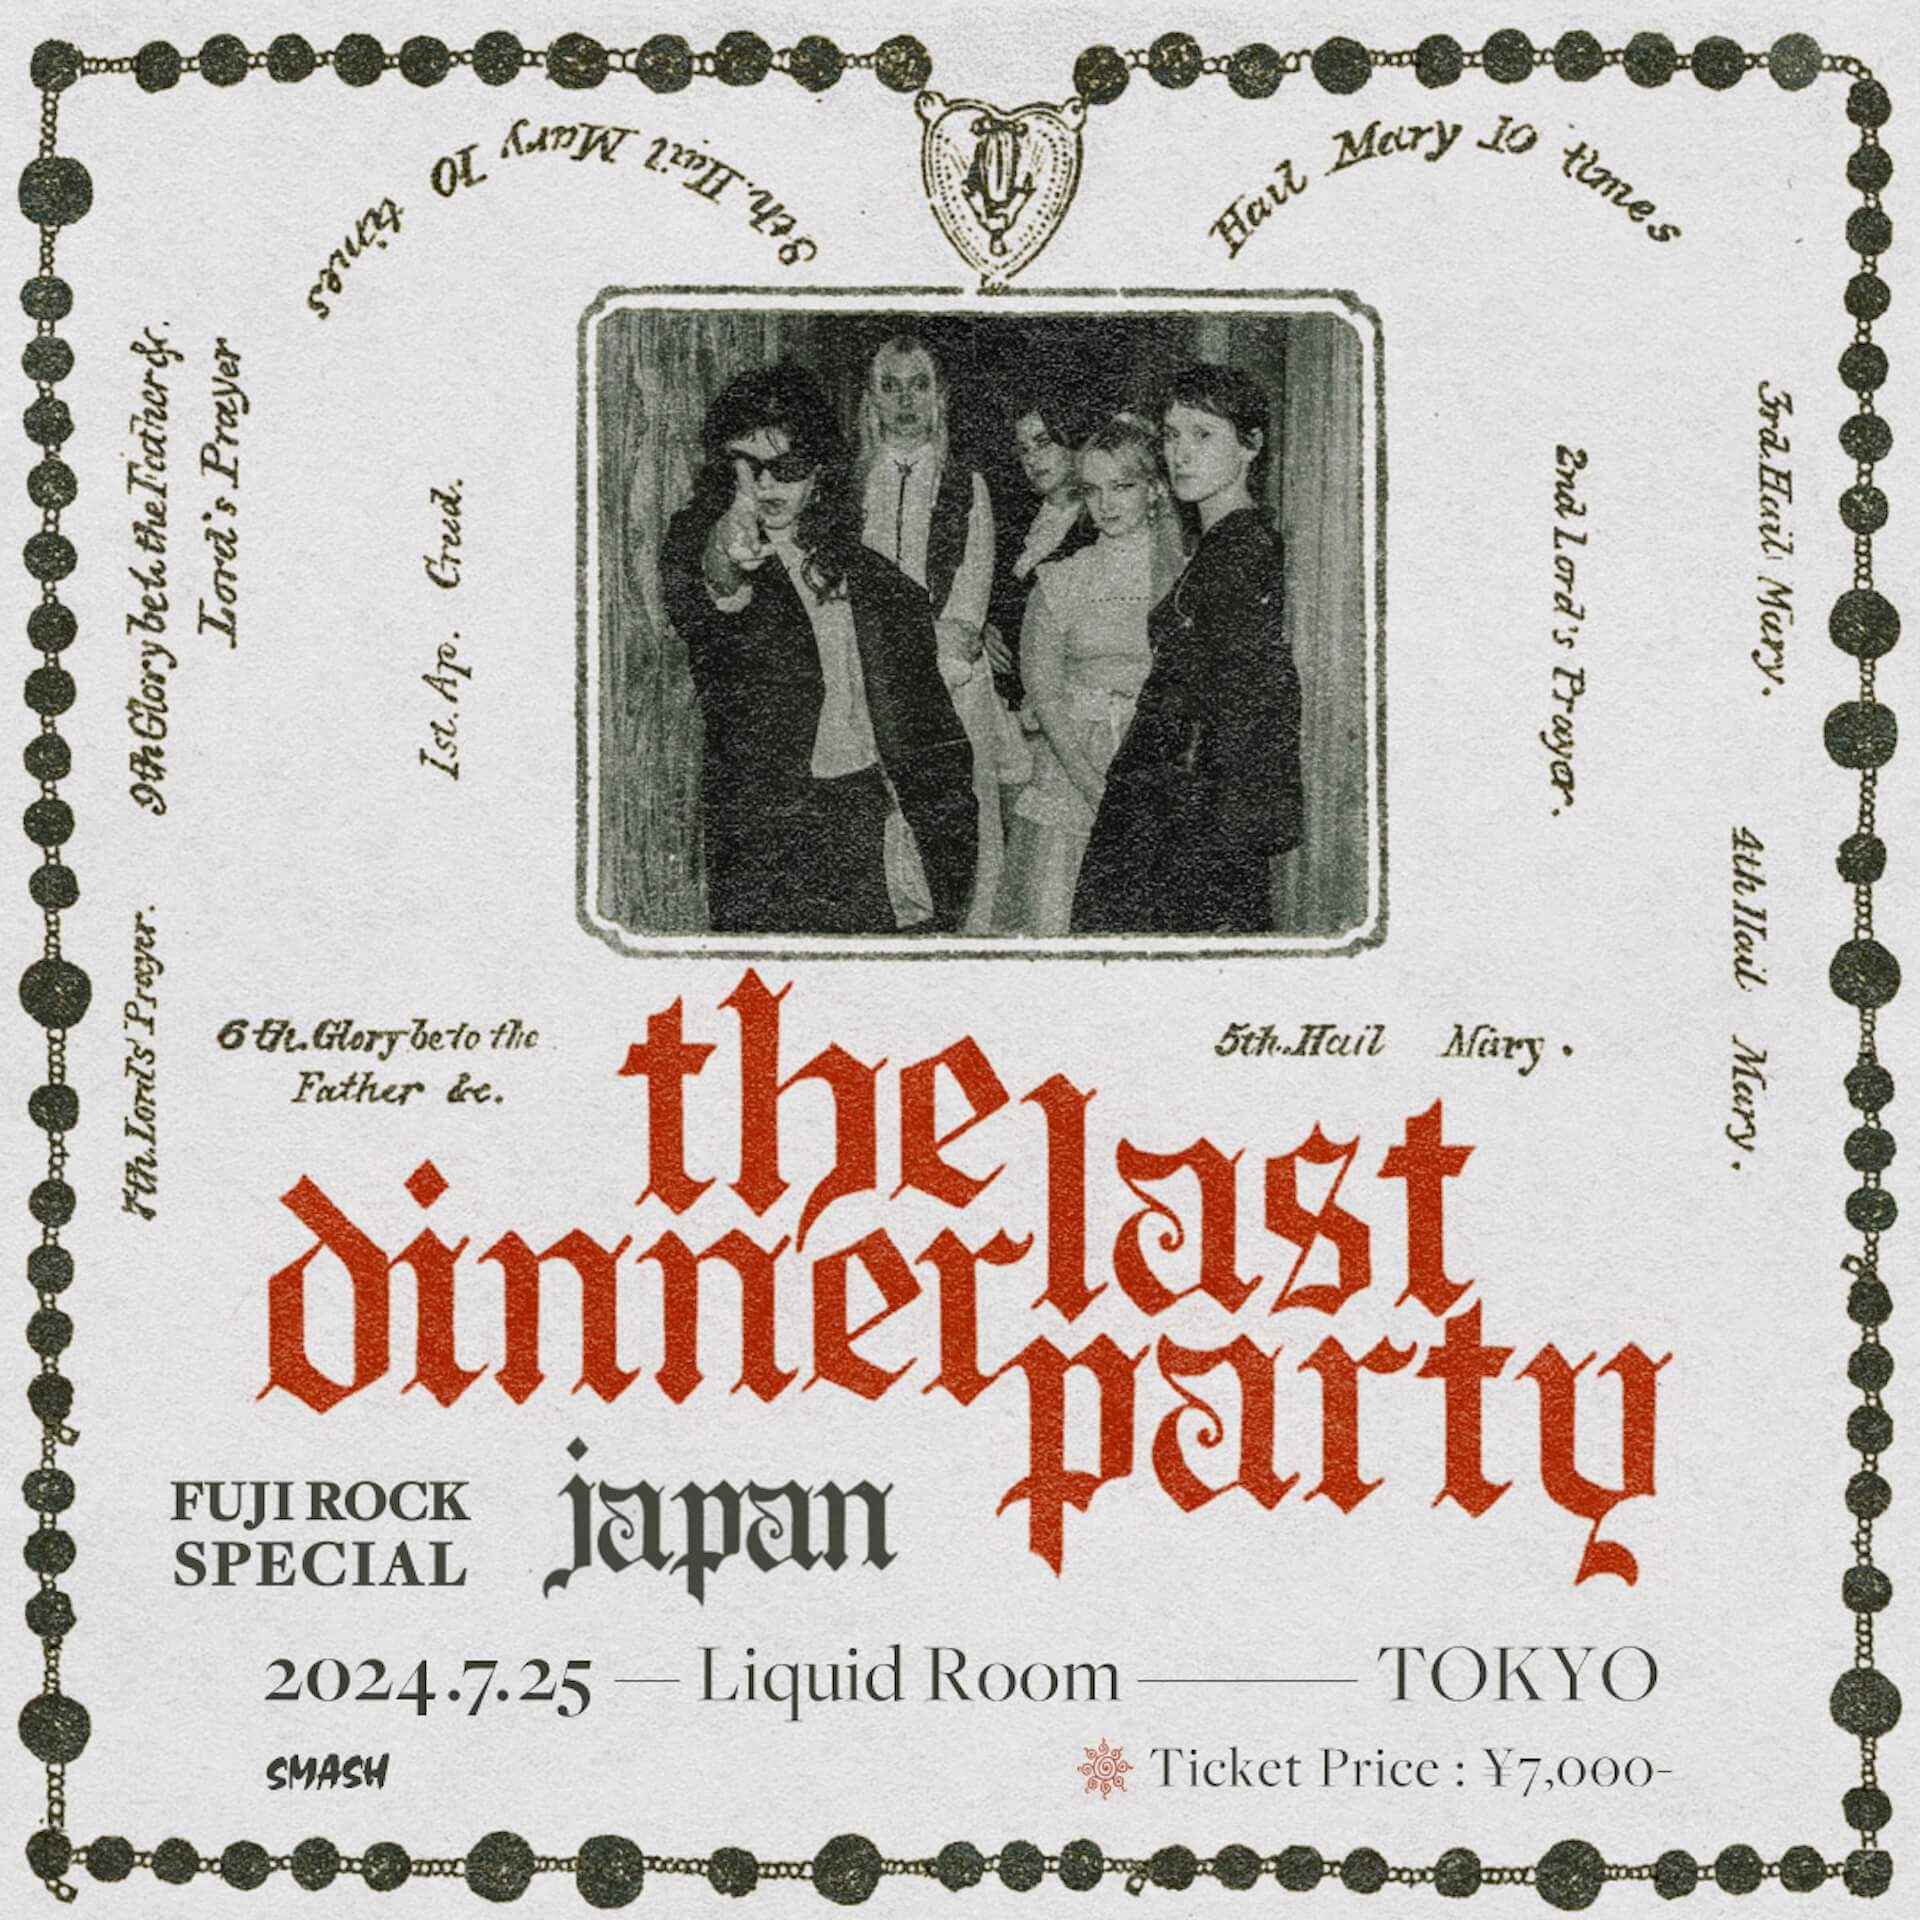 The Last Dinner Partyの単独来日公演が決定｜＜FUJI ROCK FESTIVAL ’24＞にはDAY 2のGREEN STAGEに登場 music240618-the-last-dinner-party2